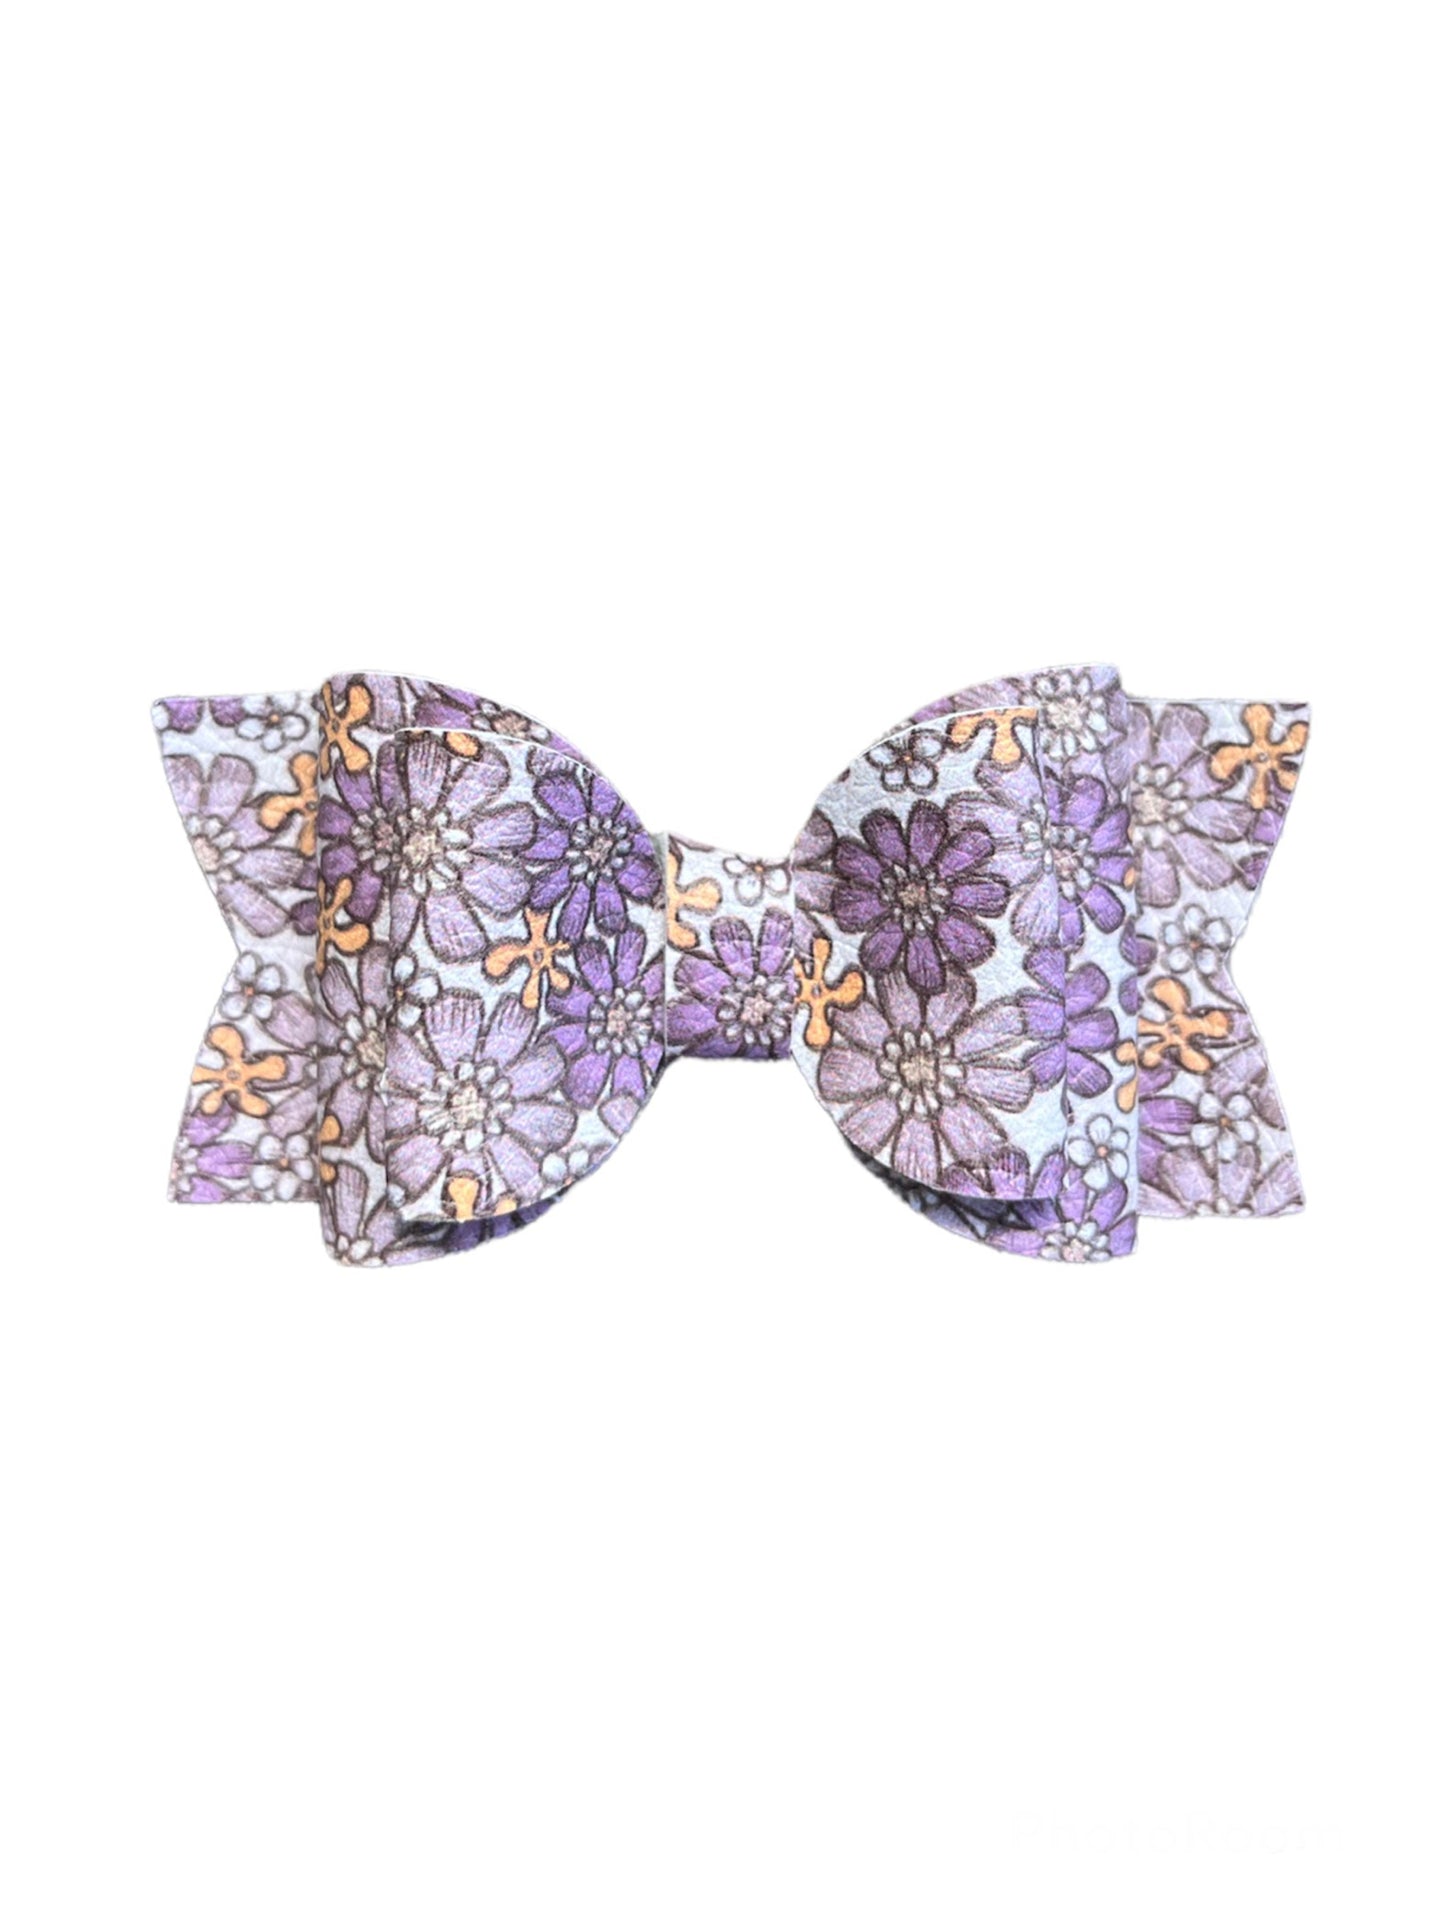 Purple Floral Classic Bow!